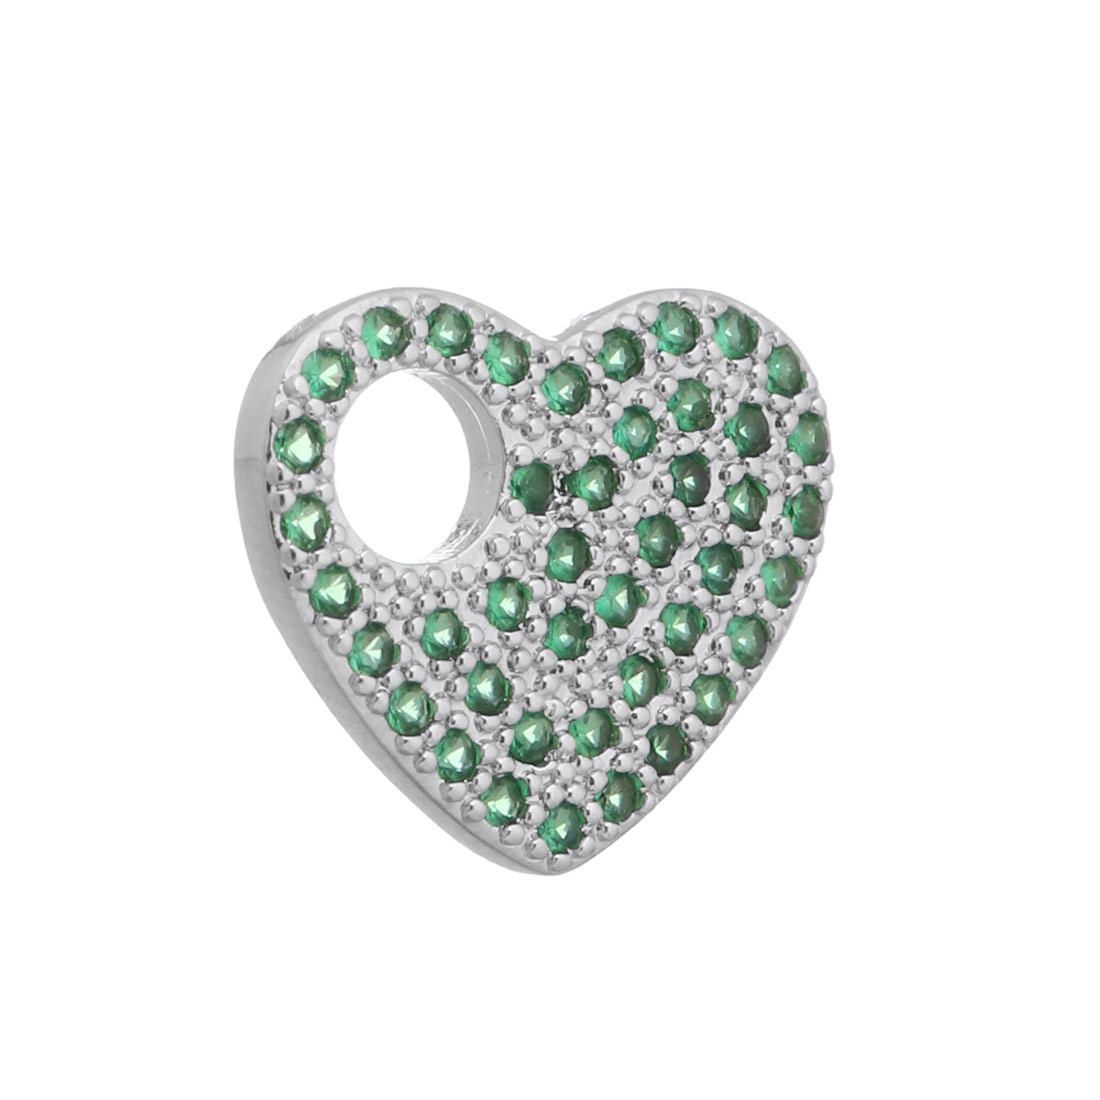 7:platinum color plated with green CZ